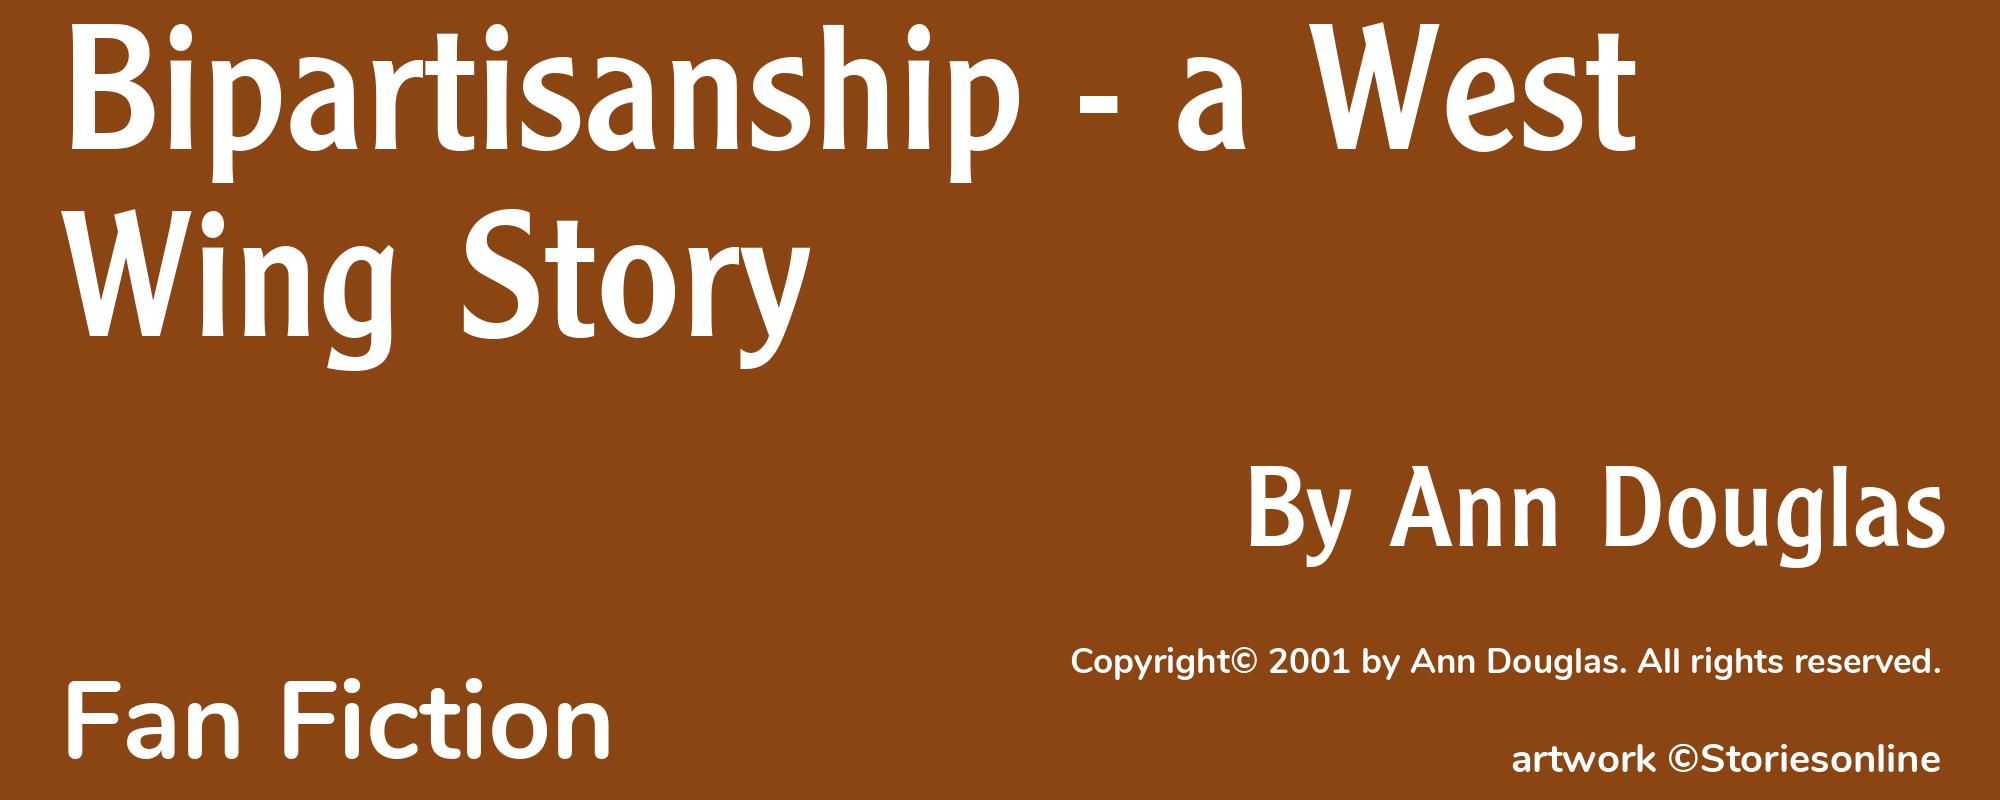 Bipartisanship - a West Wing Story - Cover